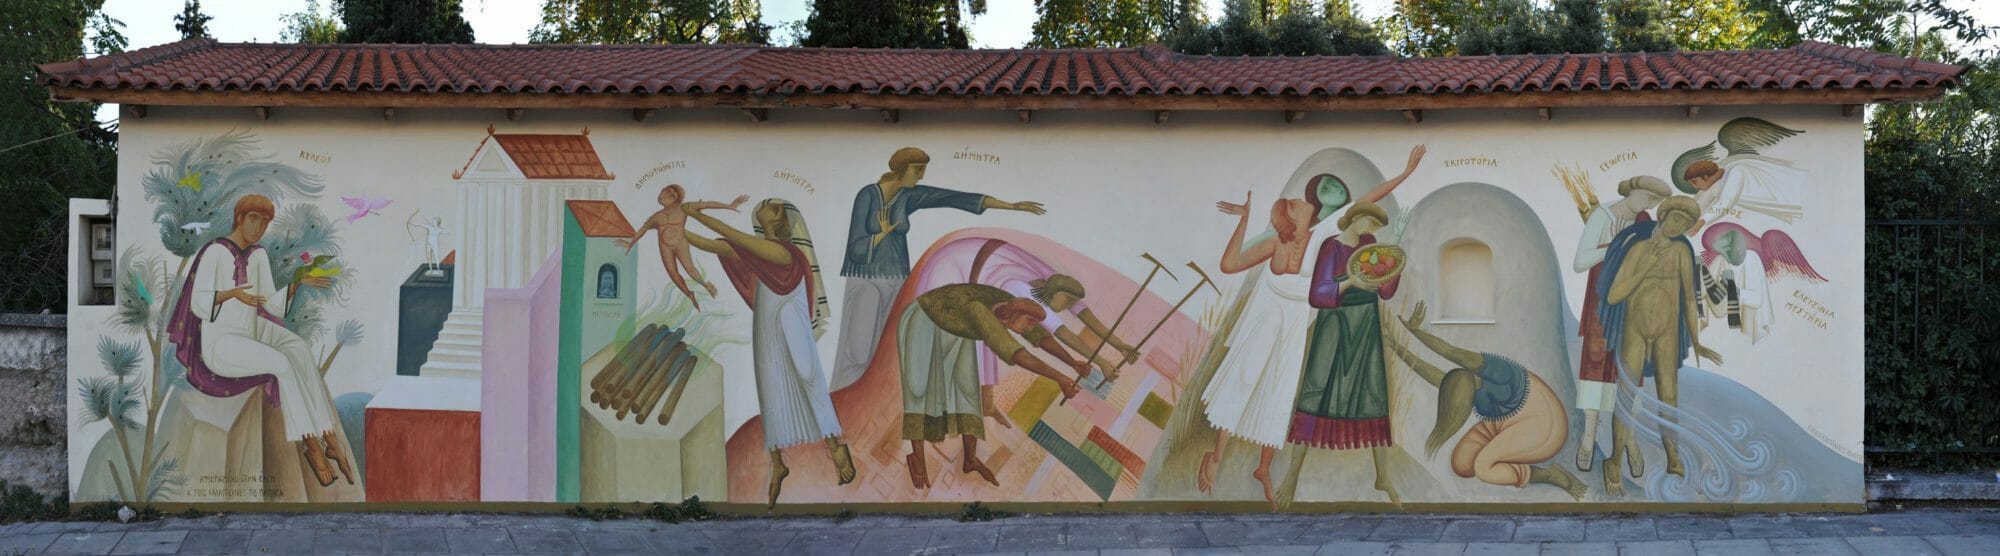 The Formation of the Demos (municipality) in Athens, by Fikos, 2012. Acrylic colors on wall, 14.5×3.3 m. Sacred Way (Iera Odos), blind side of a warehouse at the Agricultural Department of the University of Athens. 